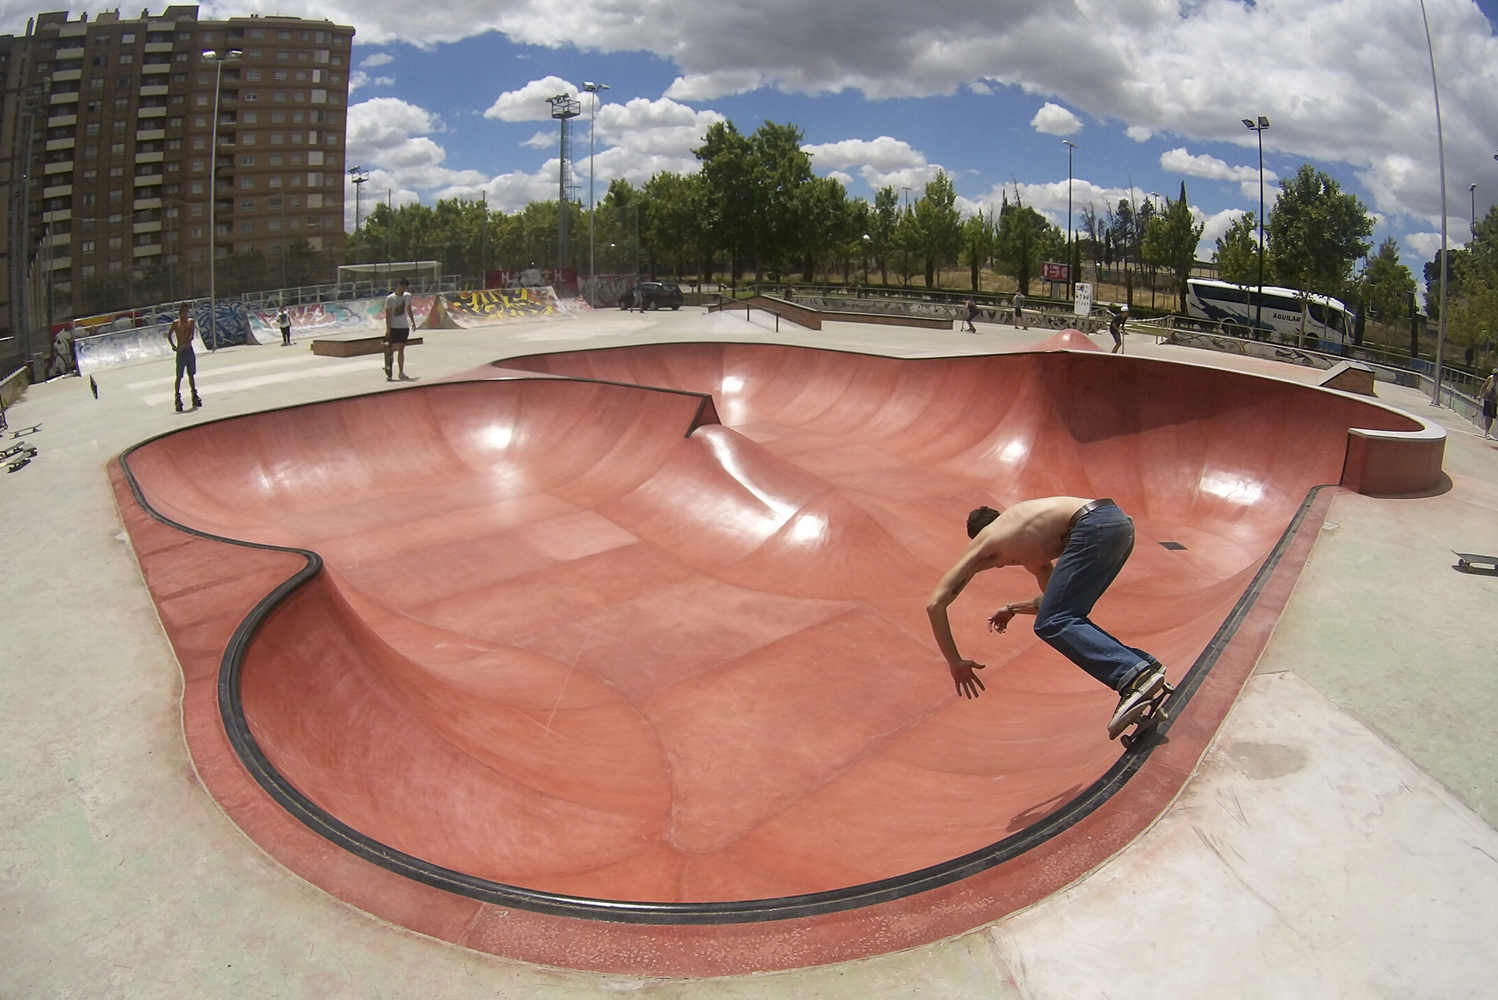 The Via Hispanidad skatepark reform has included the construction of a new ...